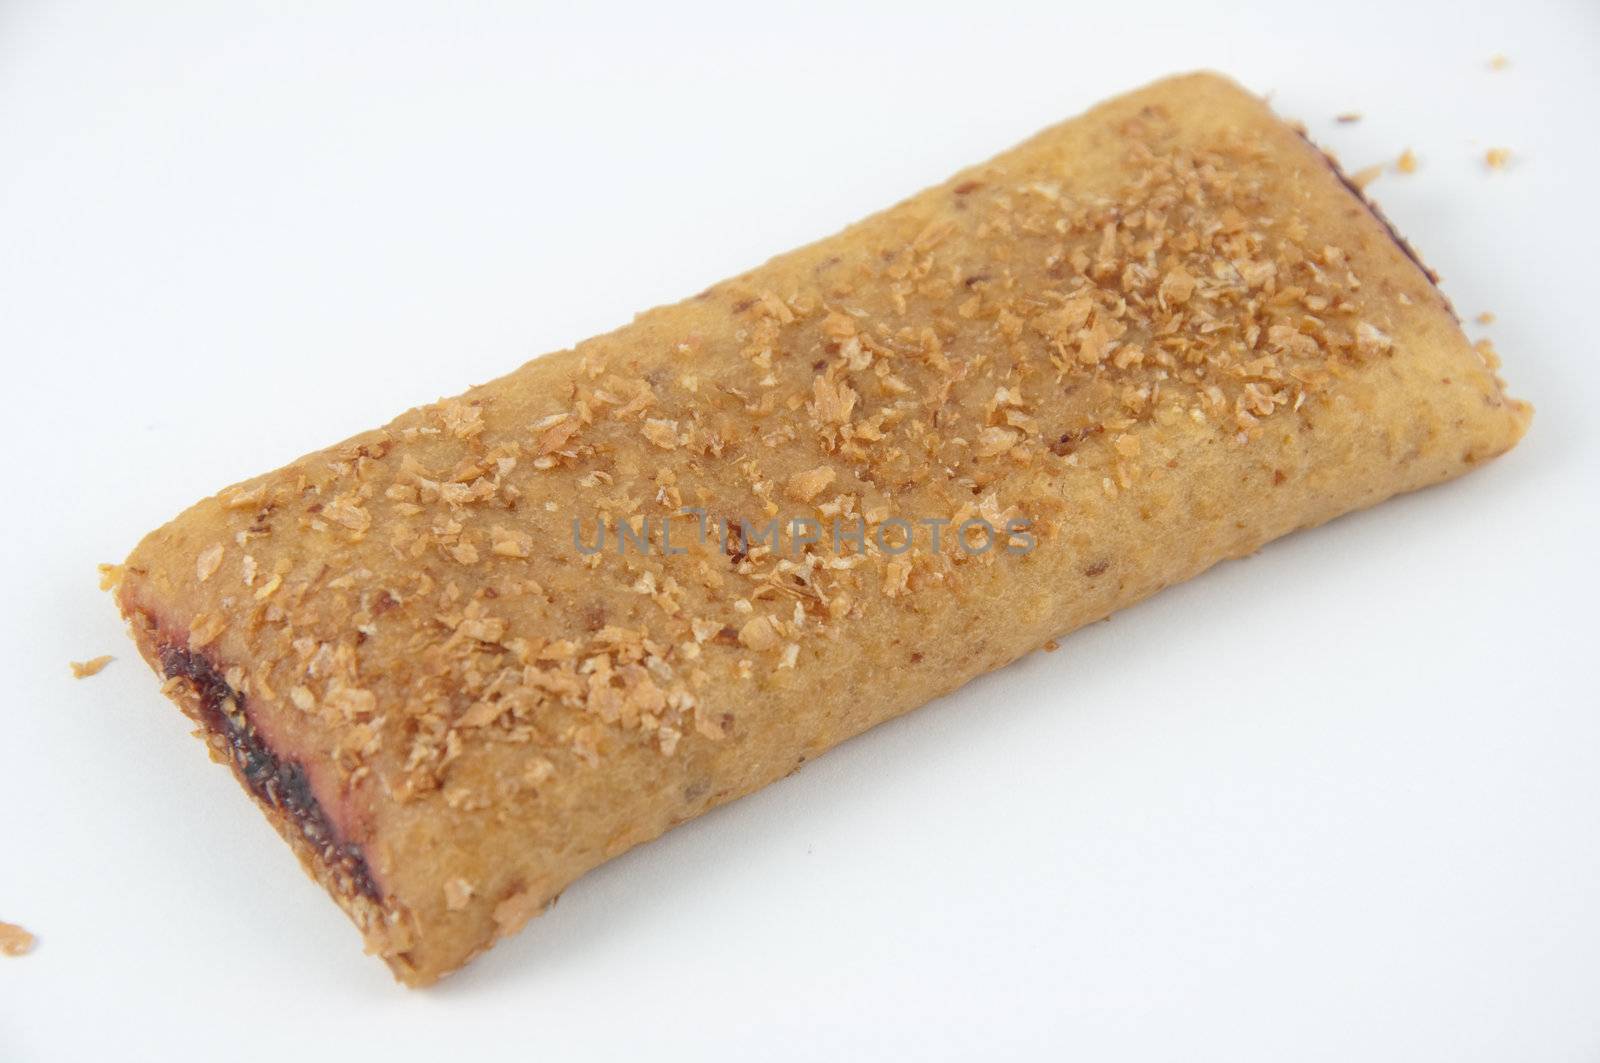 A raspberry cereal bar isolated on white.